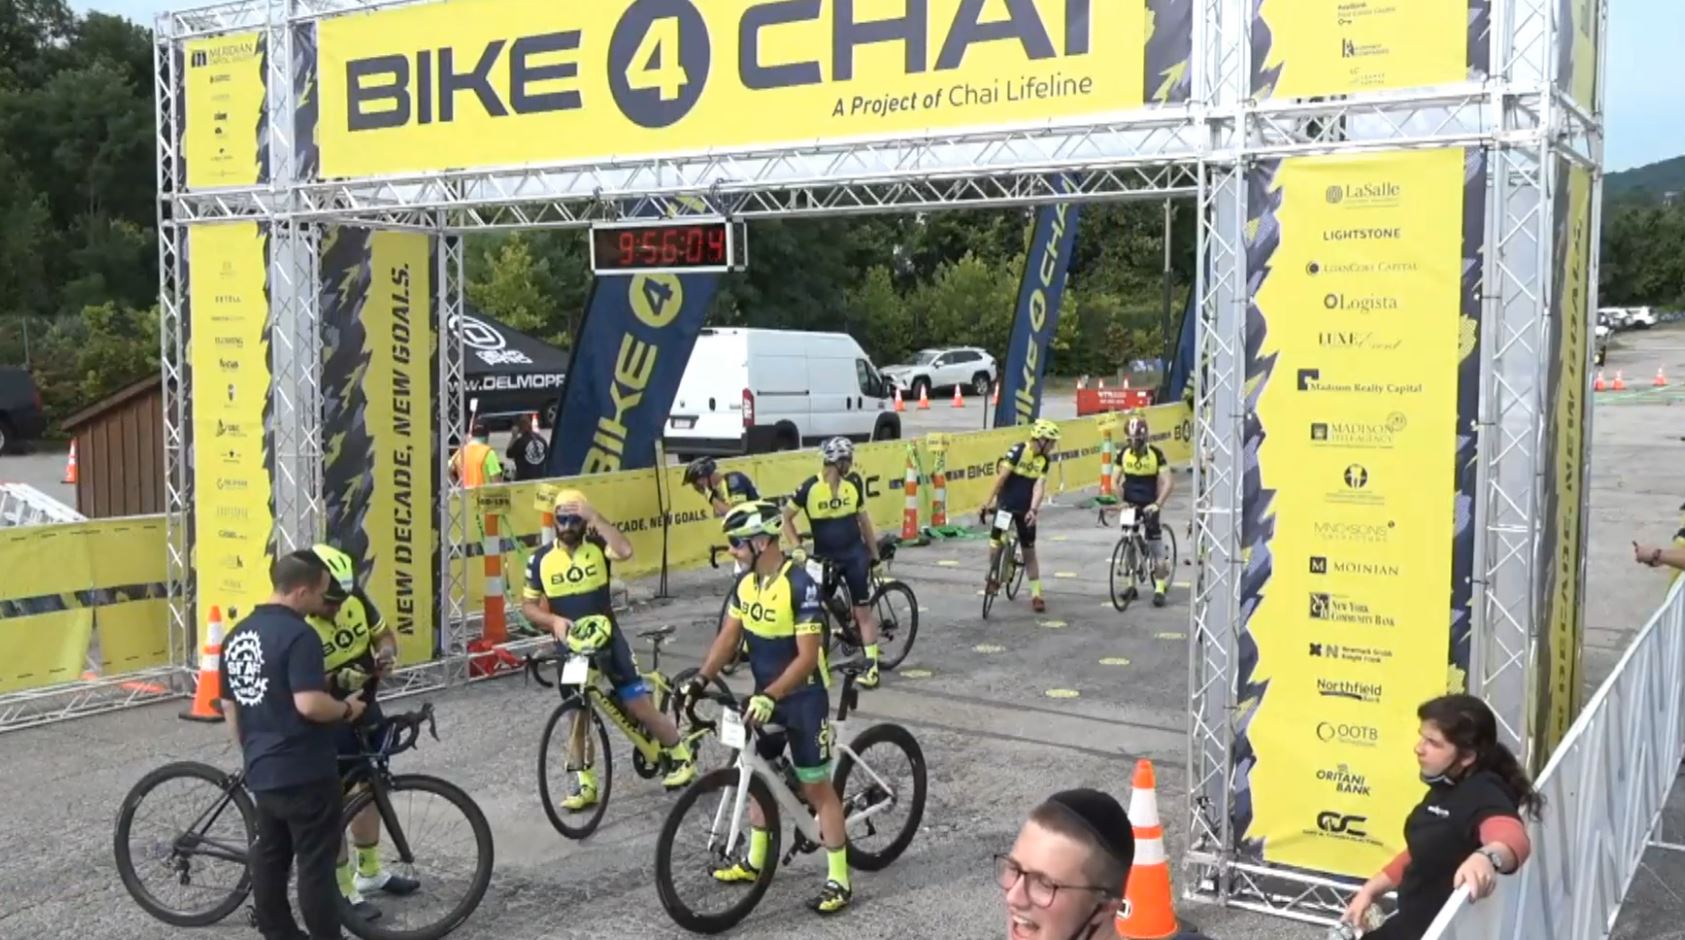 WATCH LIVE Nearly 500 Bike4Chai Cyclists Kick Off Annual Ride To Benefit Chai Lifeline Broadcast Continues 12-3 PM